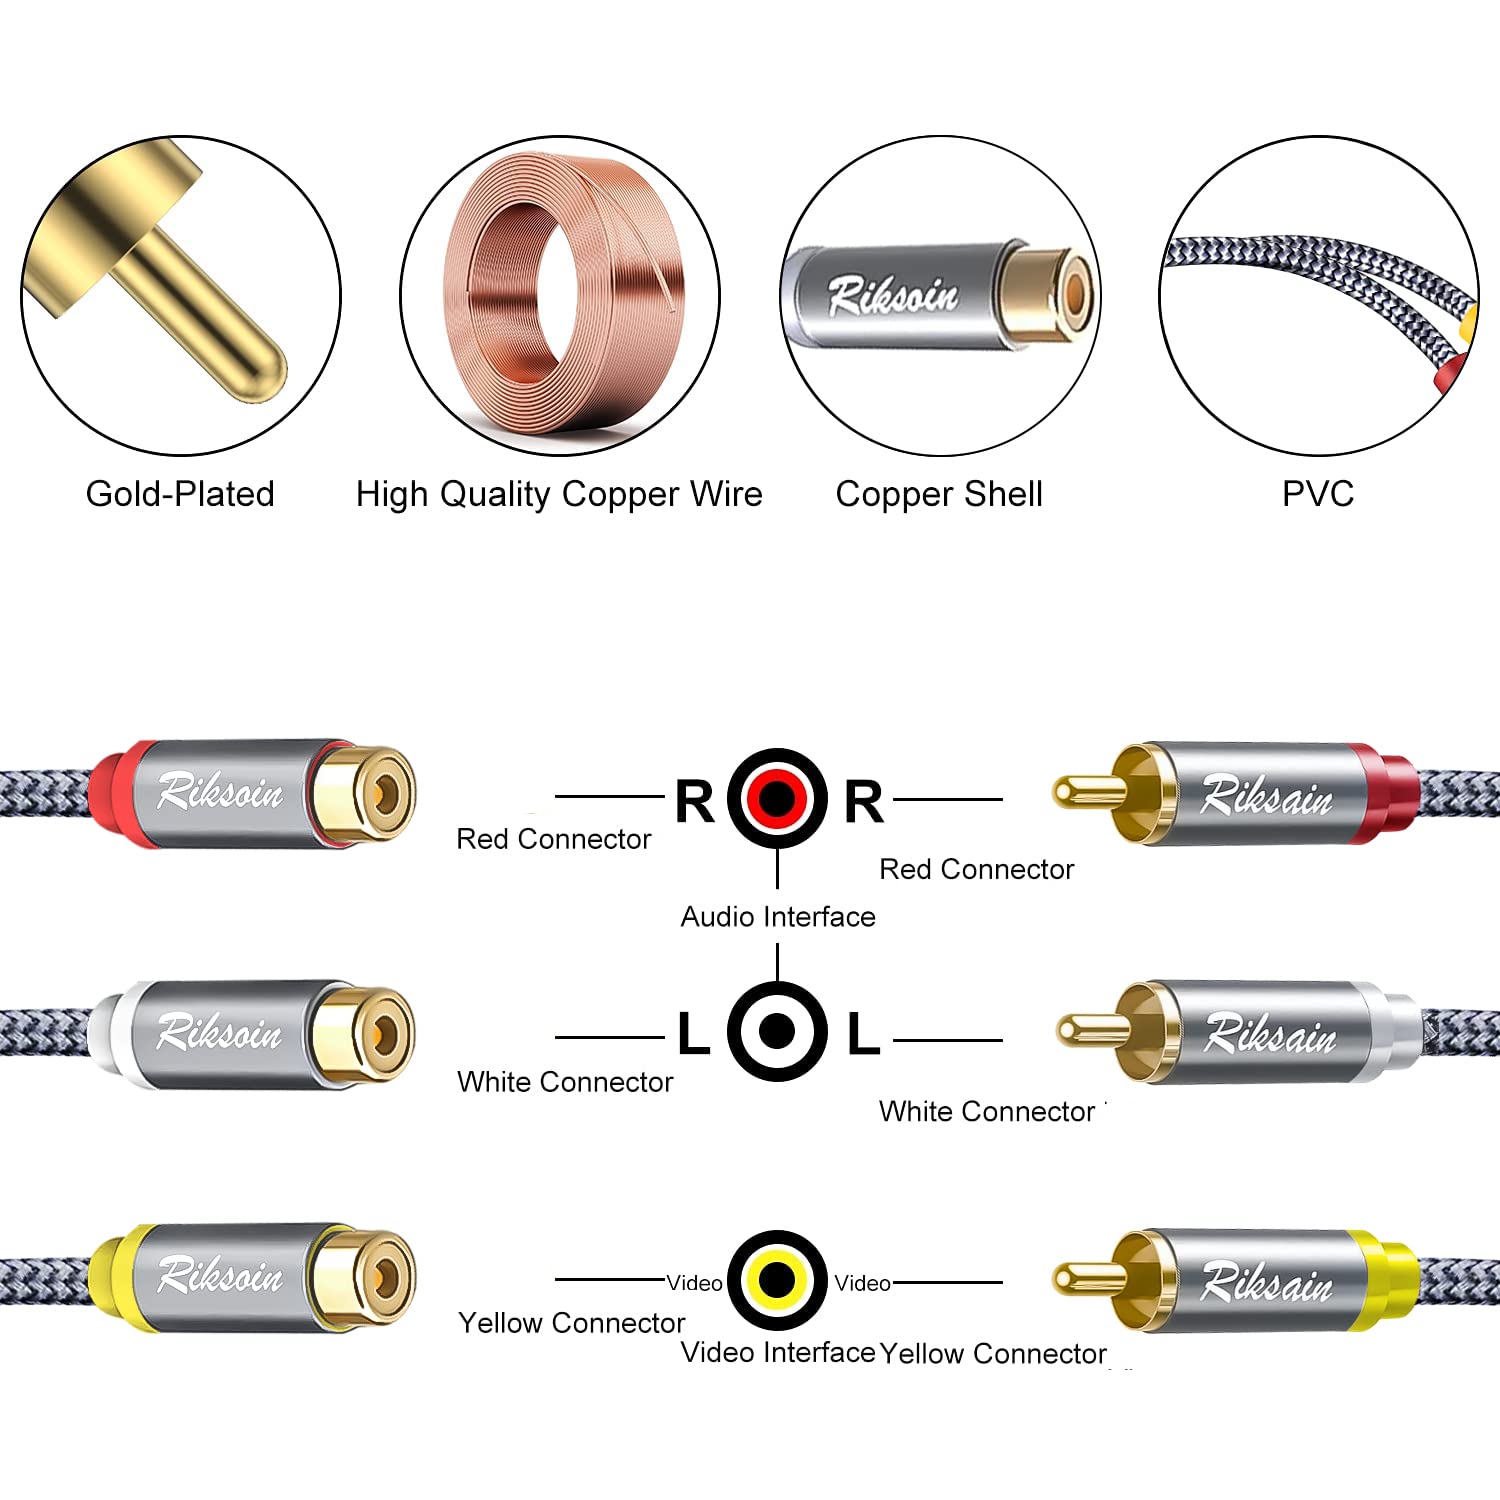 RIKSOIN Audio Video Cable, [10ft,Shielded Gold-Plated] 3-Male to 3-Female RCA Stereo AV Cable Nylon Braided Composite RCA Cord for TV, VHS, VCR, DVD Players, Satellite, Home Theater Receivers (Grey)